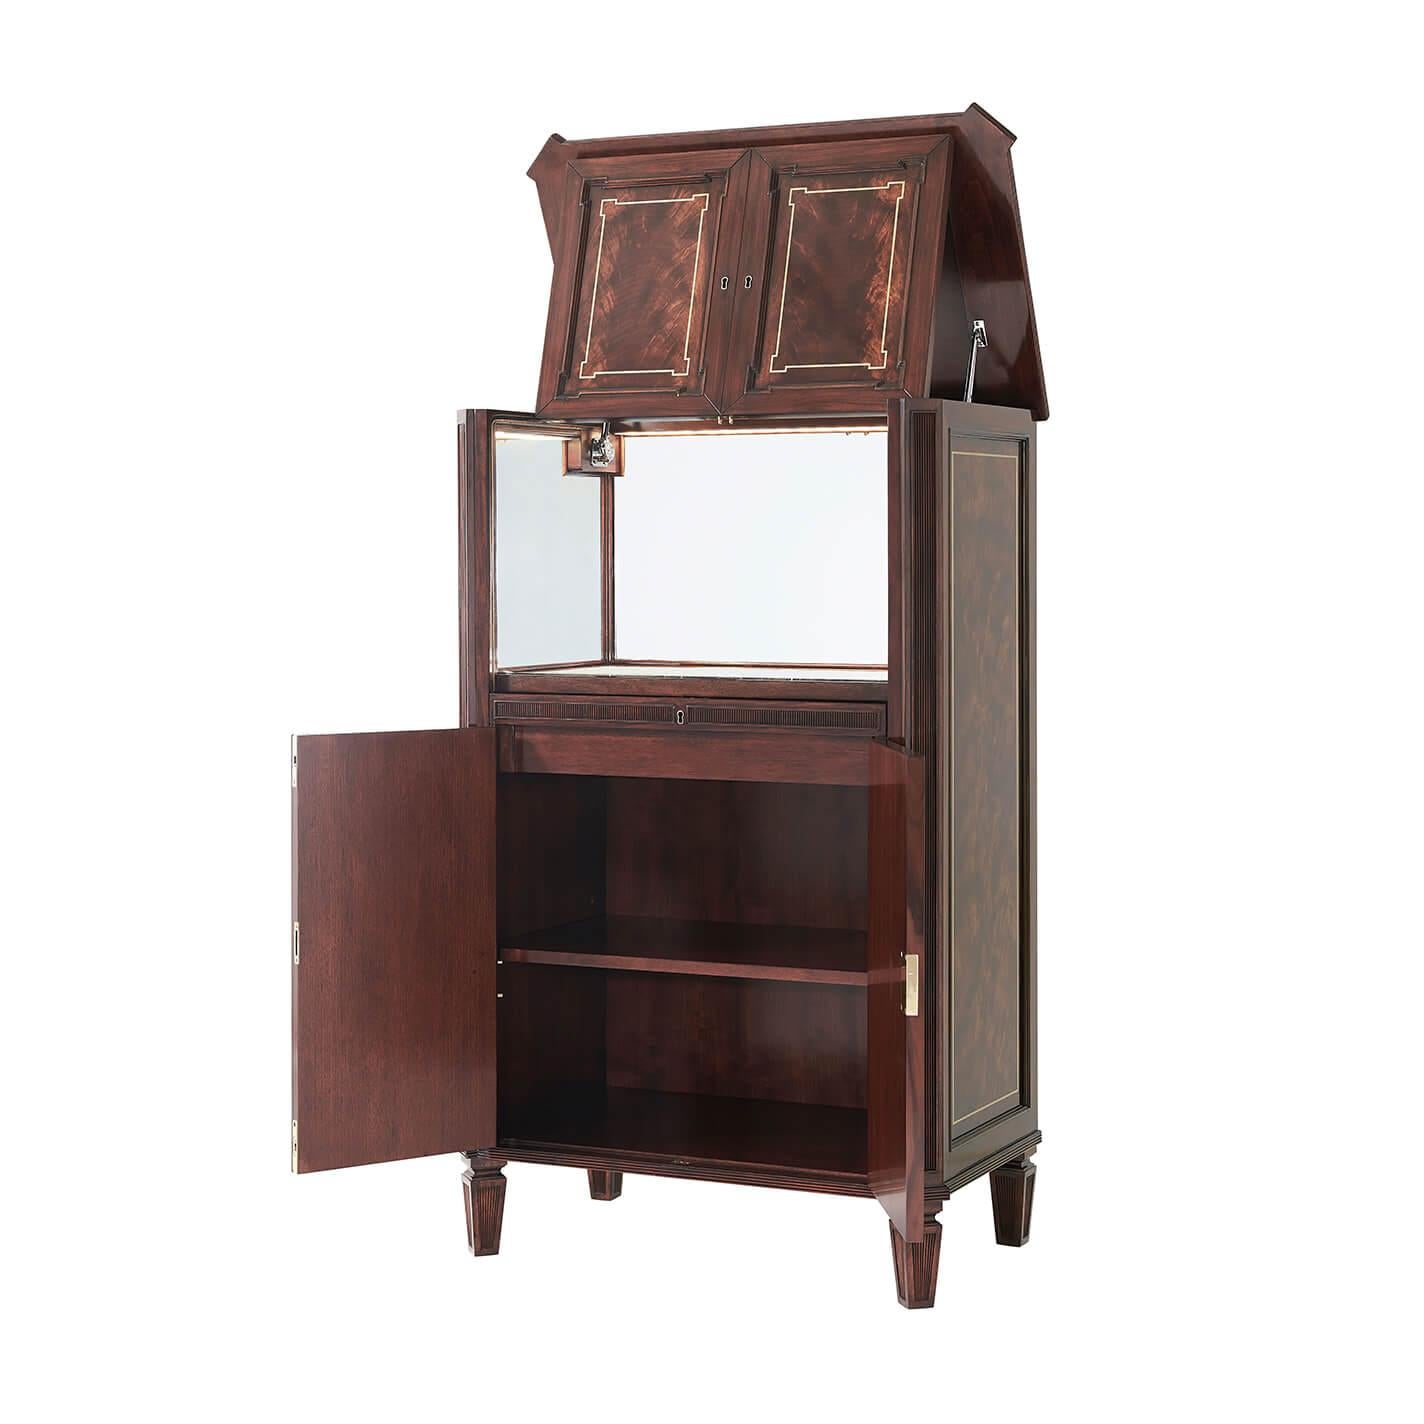 A fine English Georgian flame veneered, mahogany and brass inlaid bar cabinet, the lockable hinged top and faux cabinet front opening to reveal a marble and mirrored interior, the canted paneled angles enclosing a frieze drawer and two cabinet doors